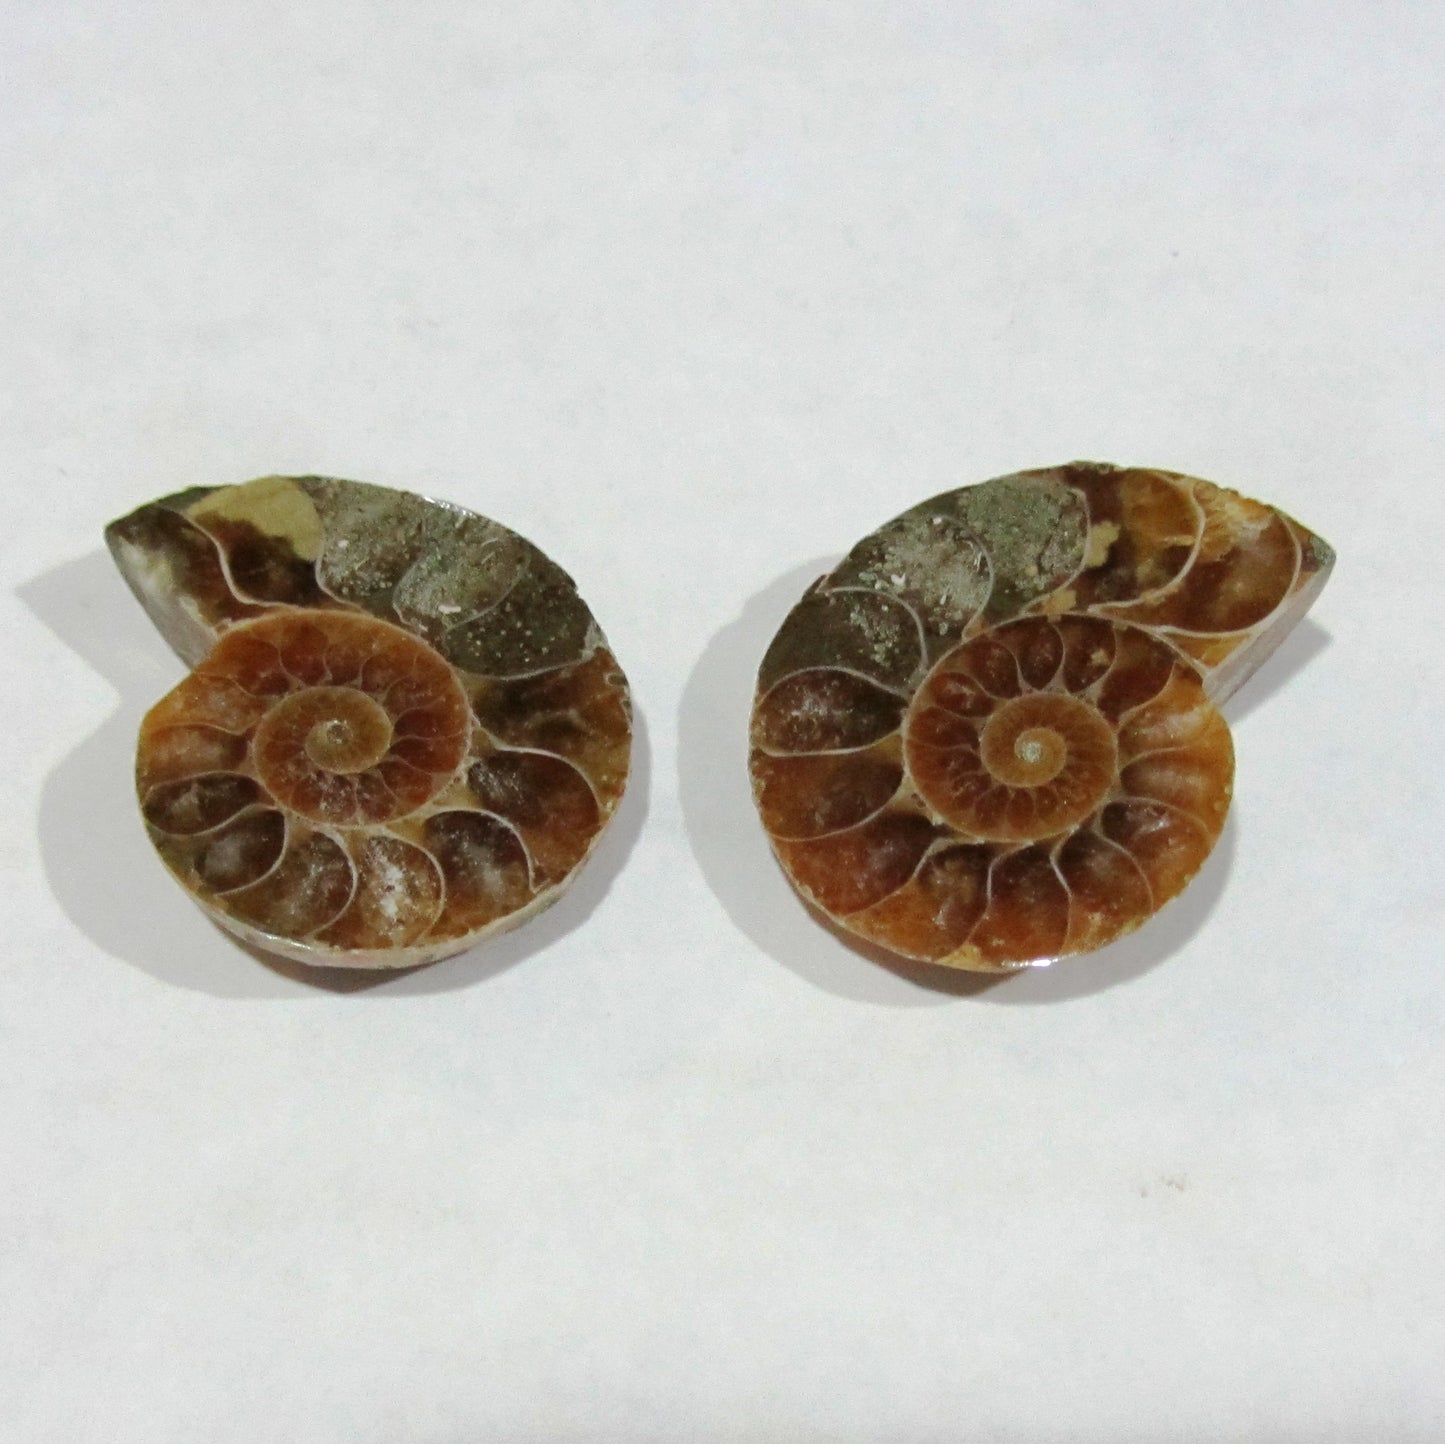 Ammonite Spiral Fossil Pair | 2pcs - The Meteorite Traders